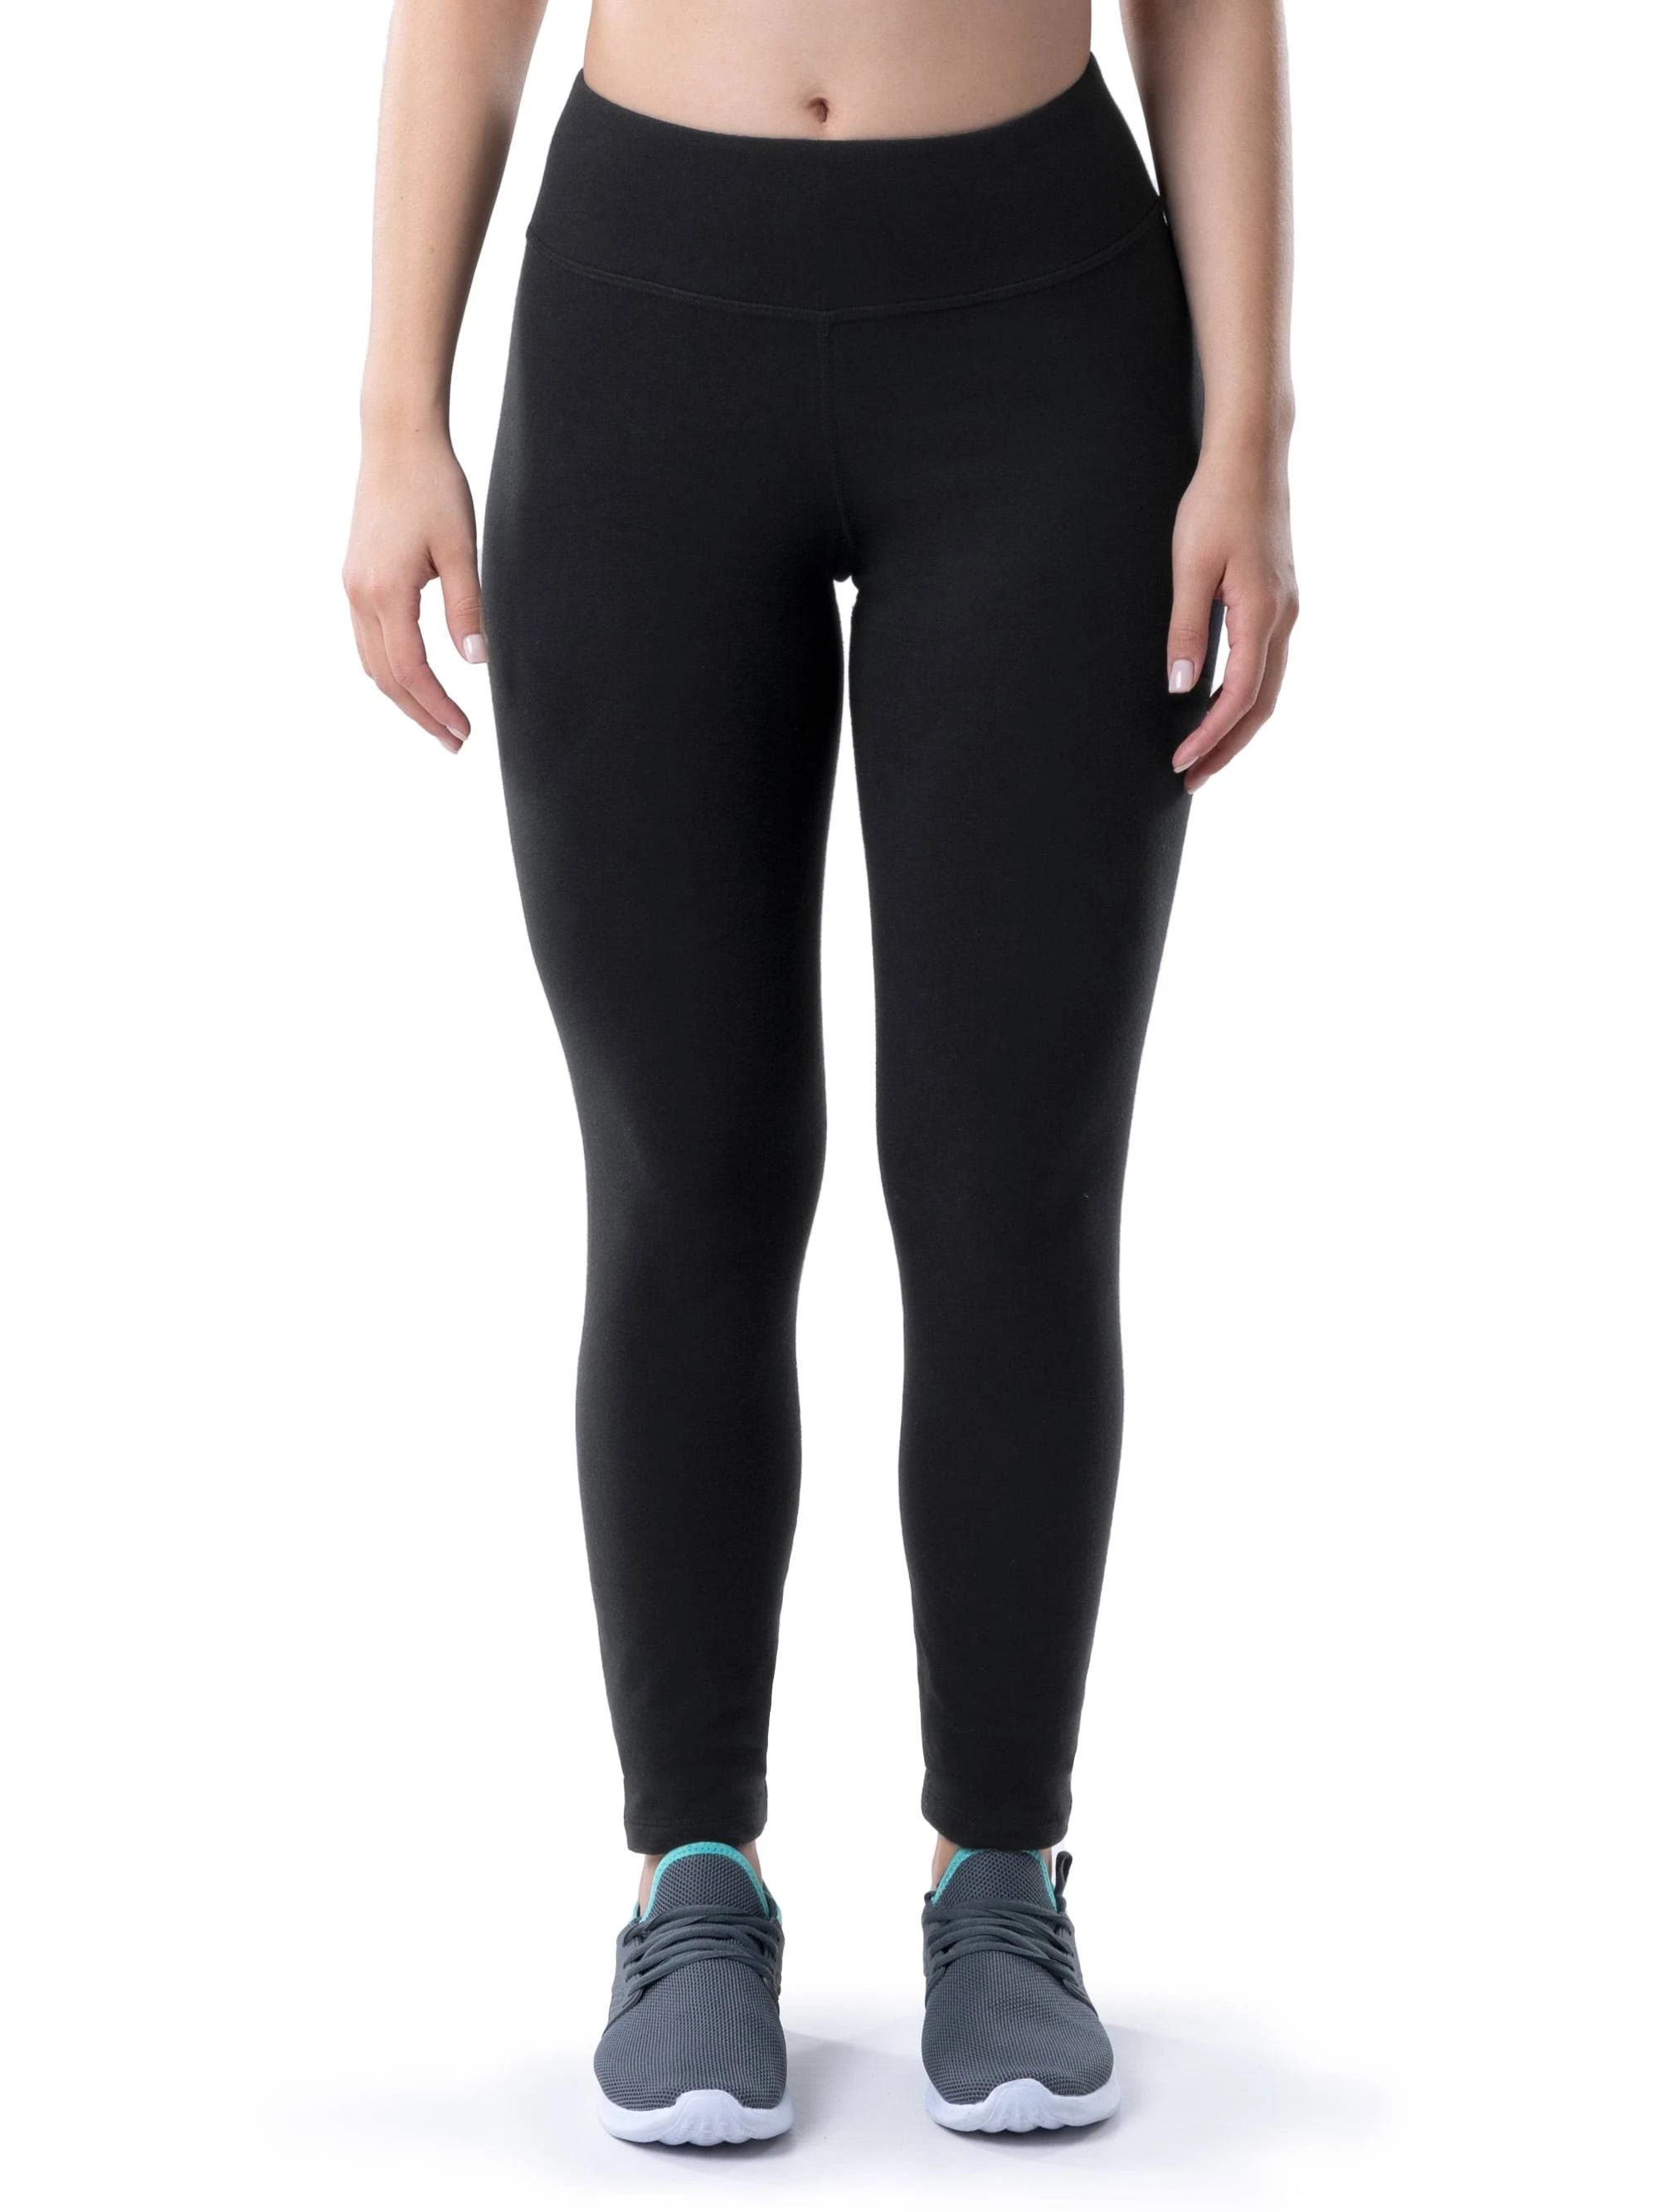 Women's Dri-Works Active Leggings for Ultimate Comfort and Movement | Image